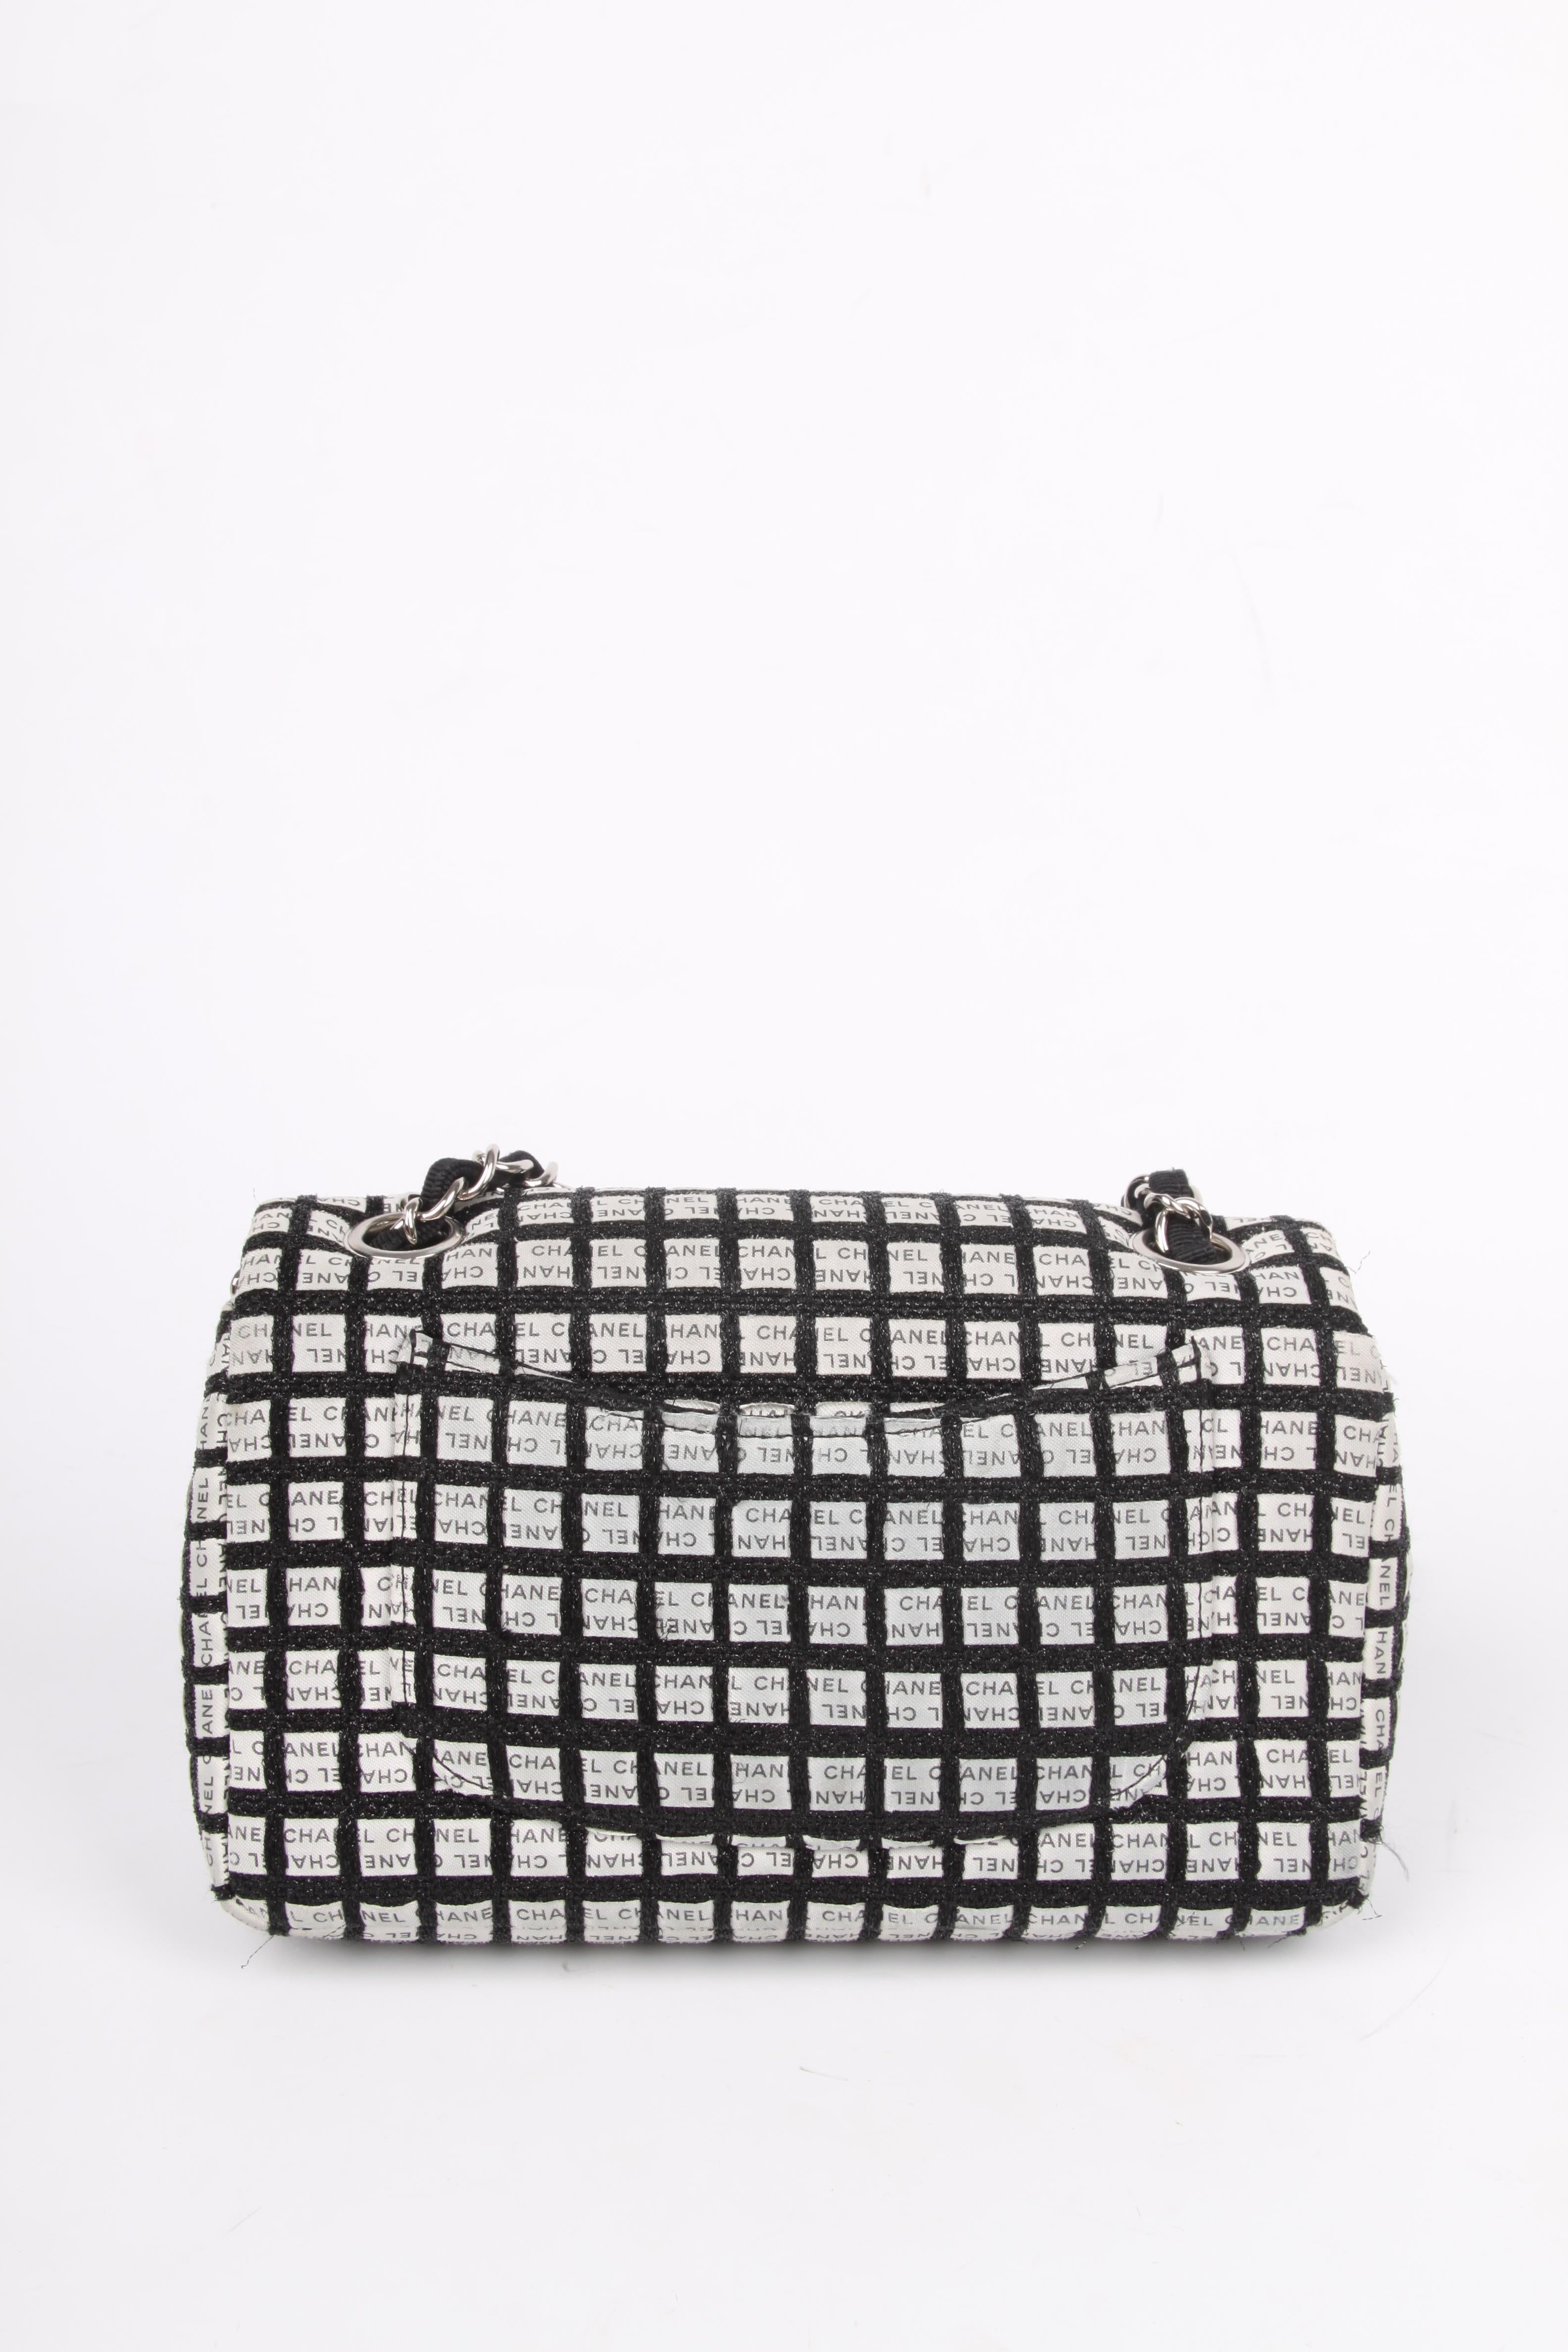 Chanel Mini Classic - black & white In Fair Condition For Sale In Baarn, NL